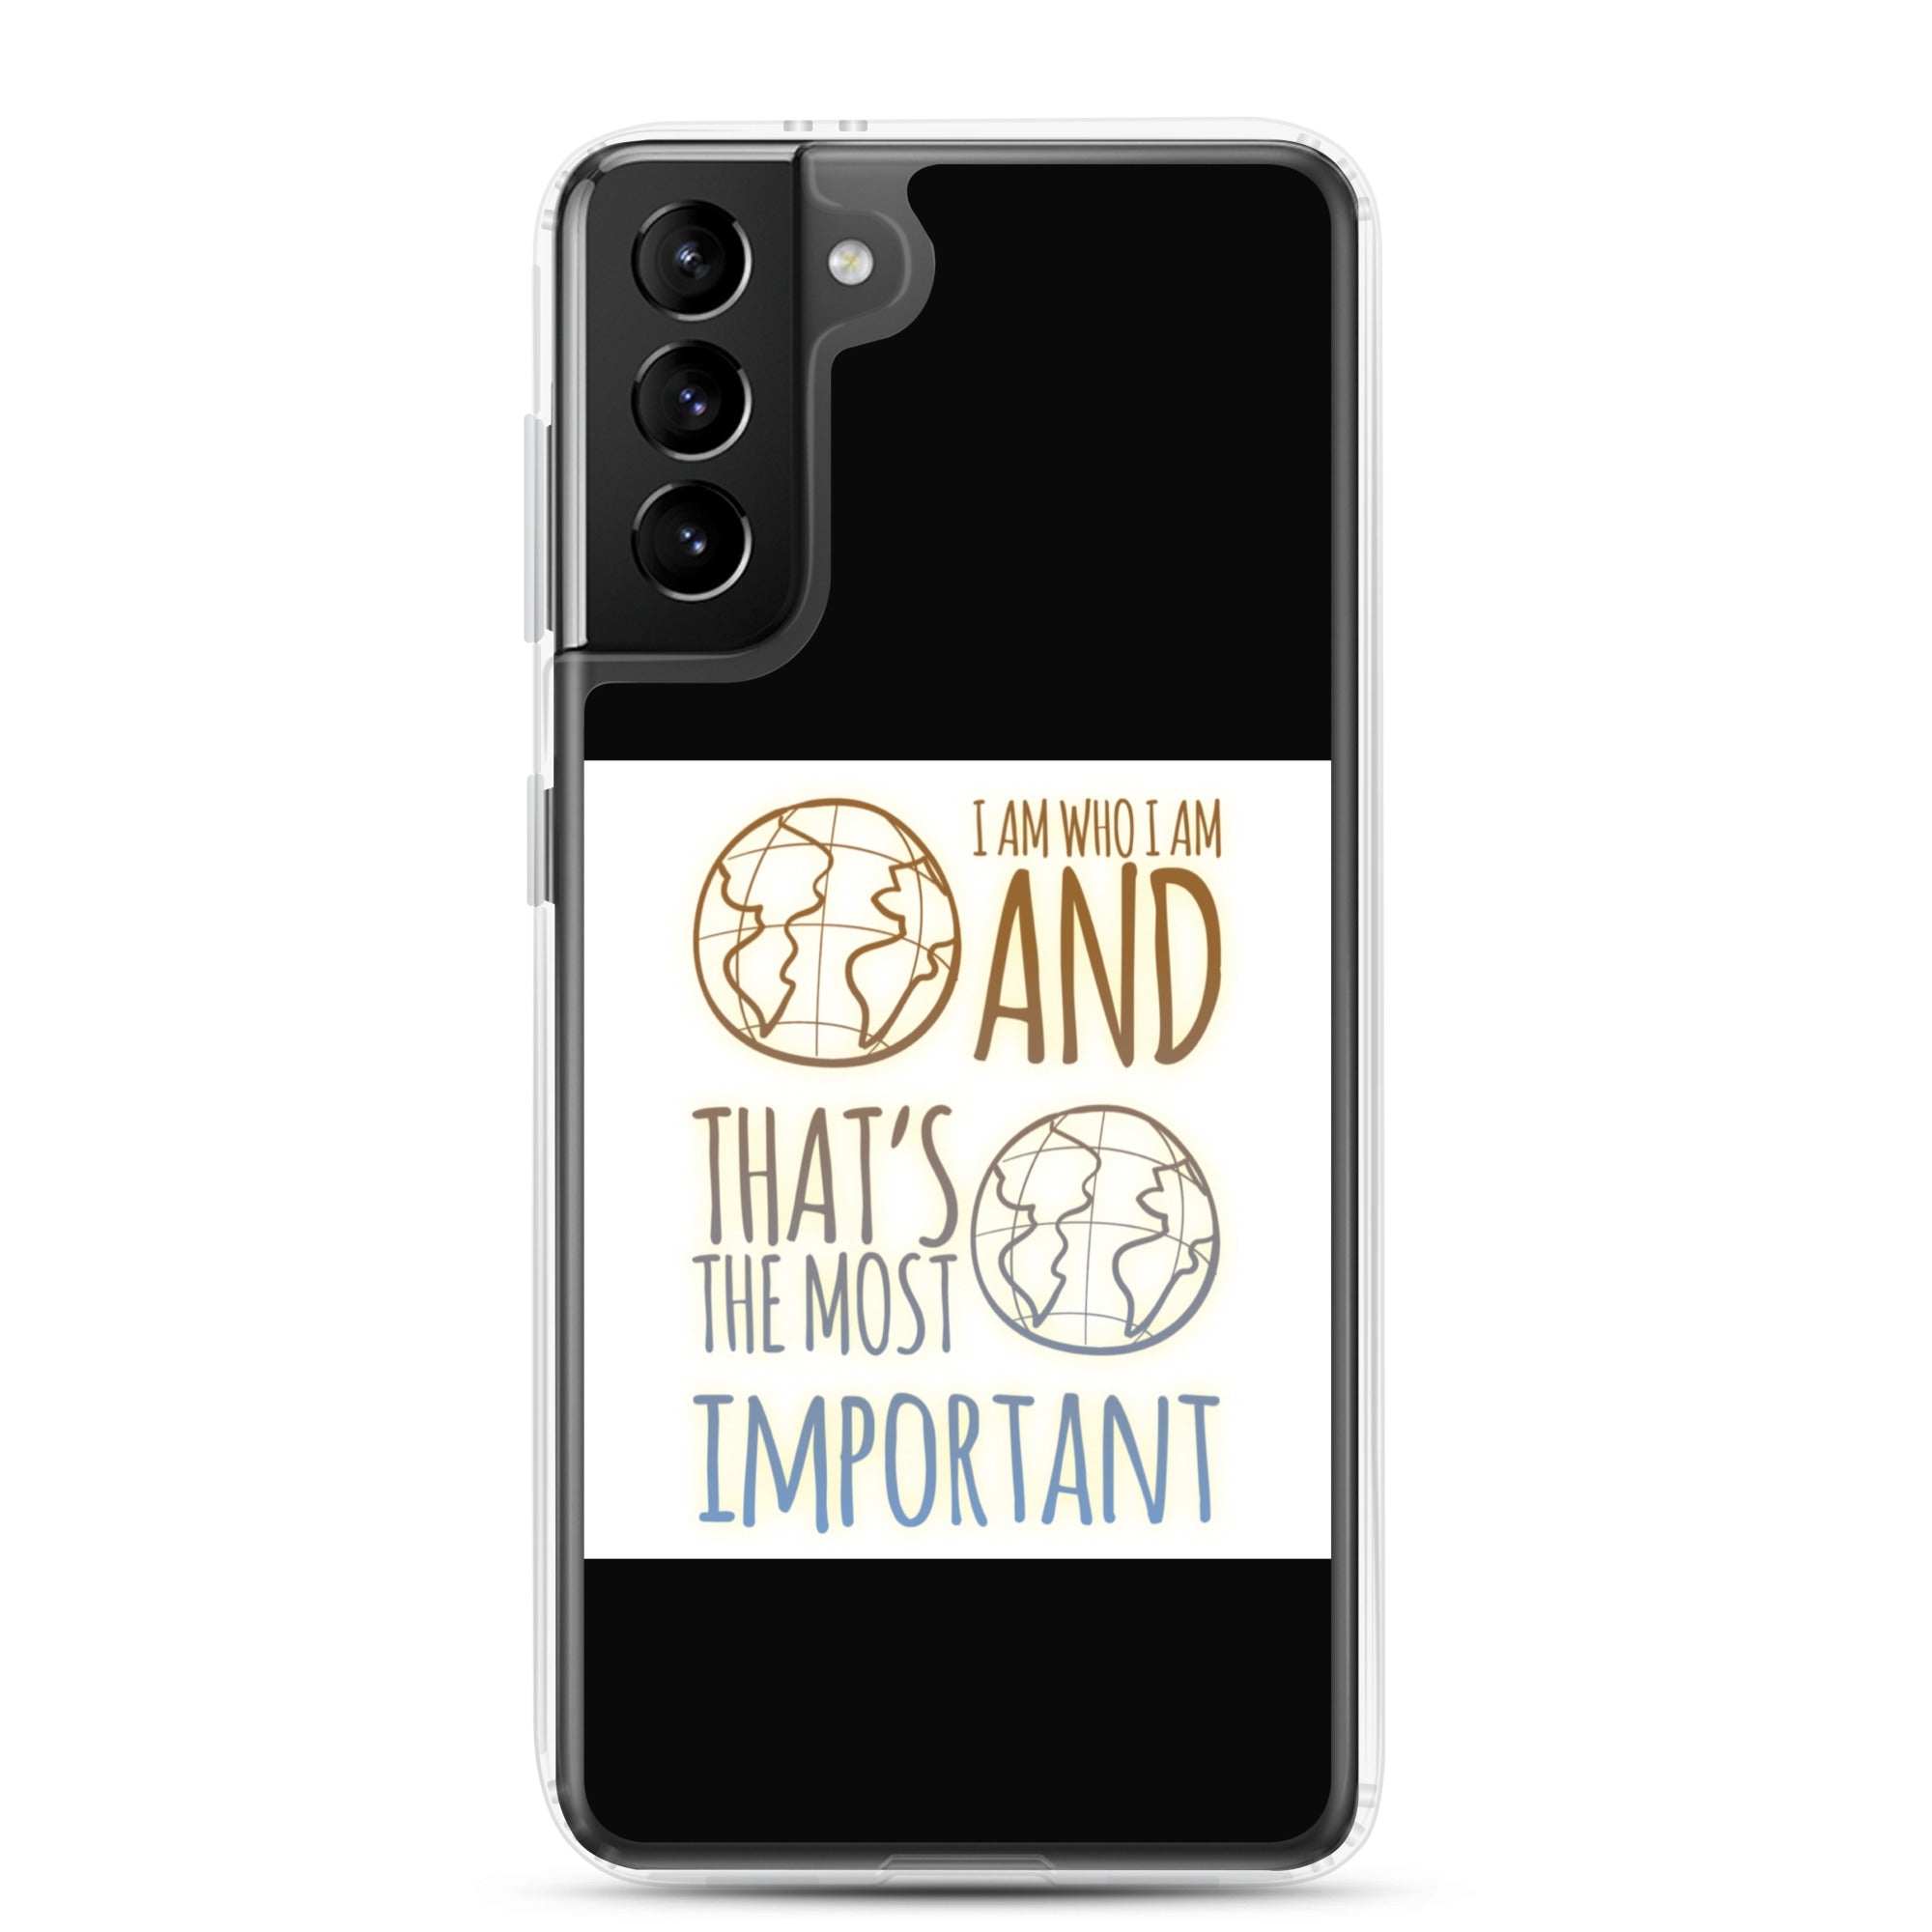 GloWell Designs - Samsung Case - Affirmation Quote - I Am Who I Am - GloWell Designs